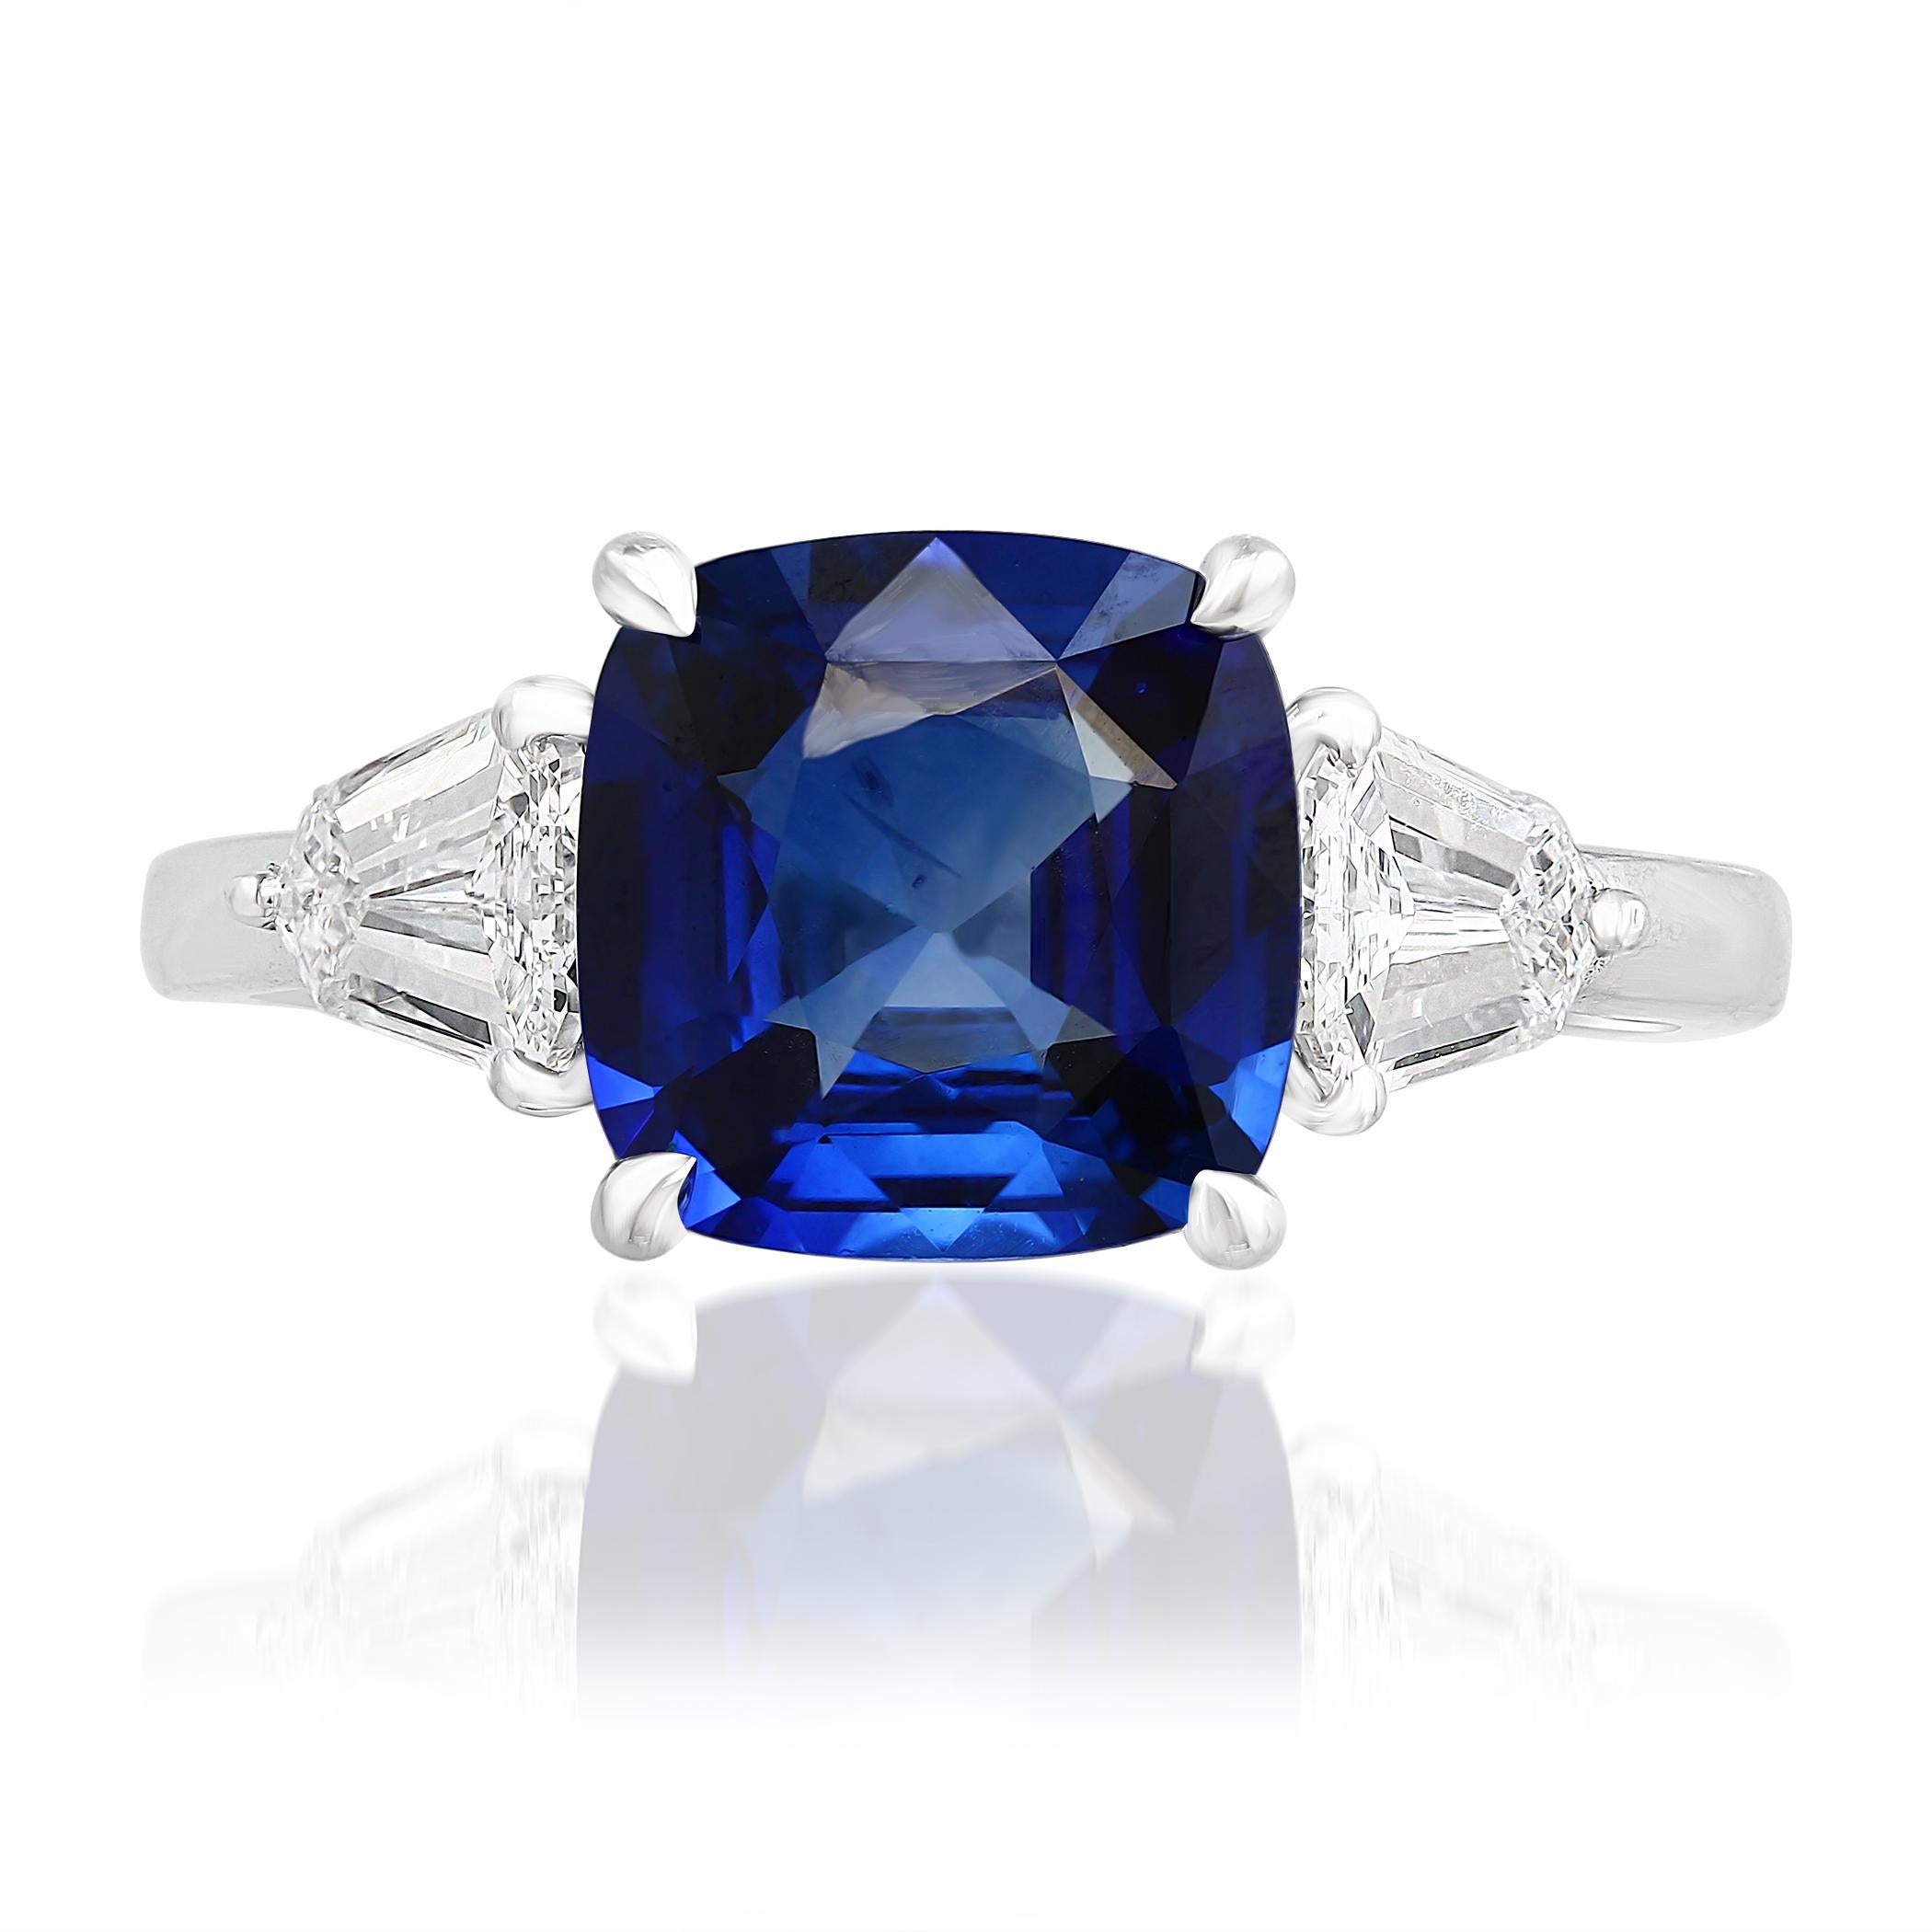 Features a gorgeous 2.60 carat cushion cut blue sapphire. Flanked by a bullet cut diamond side stone and each side weighing 0.71 carats total. Set in platinum.

Style available in different price ranges. Prices are based on your selection. Please